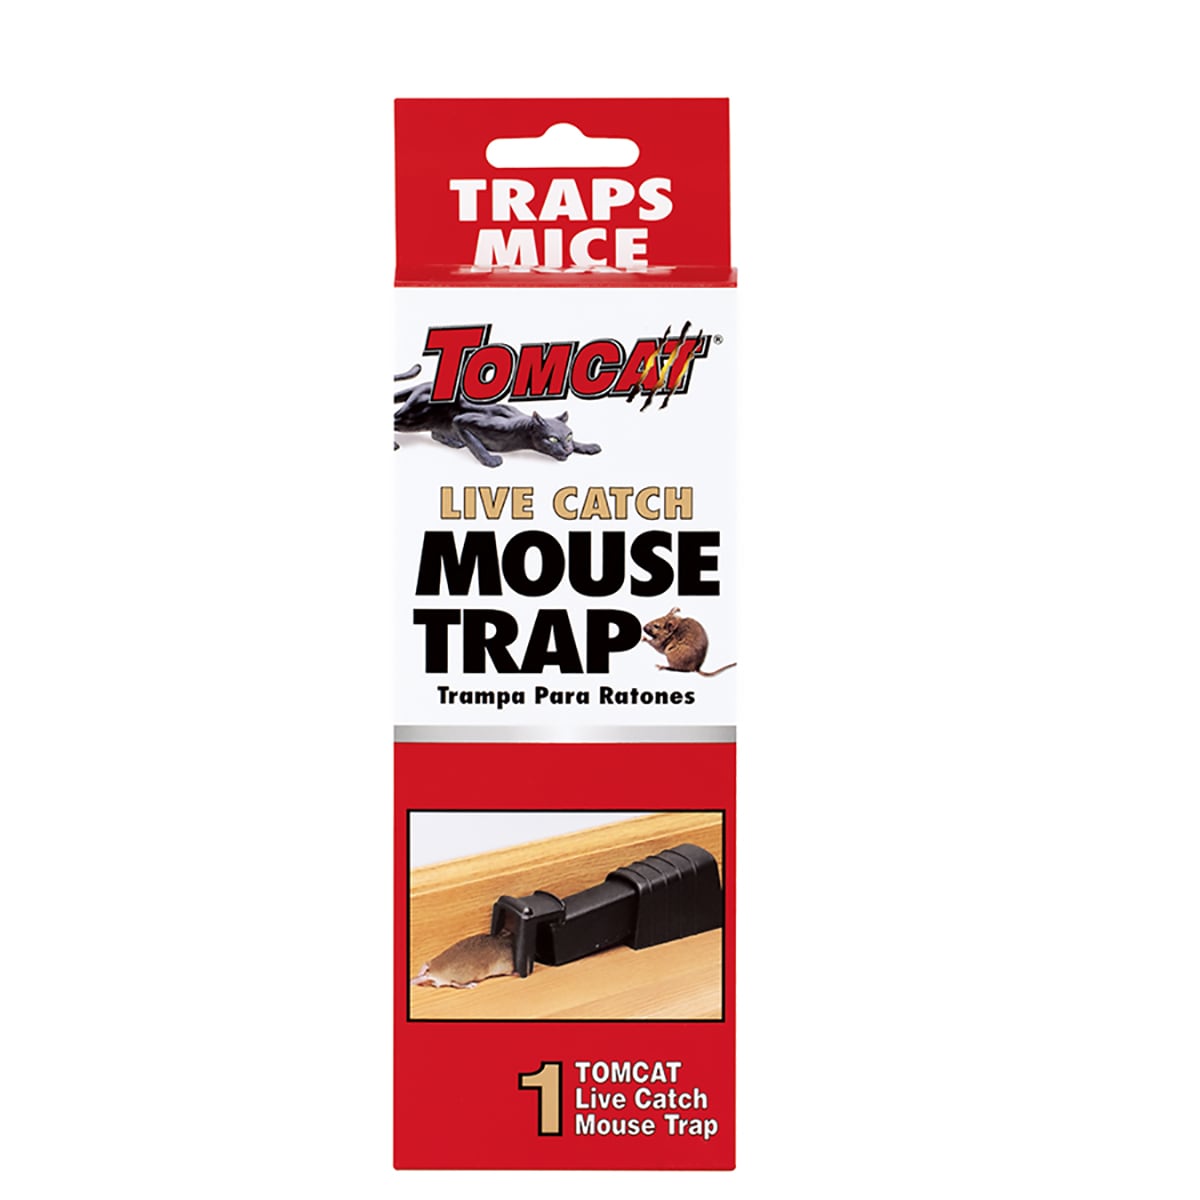 TOMCAT Live Catch Mouse Traps at